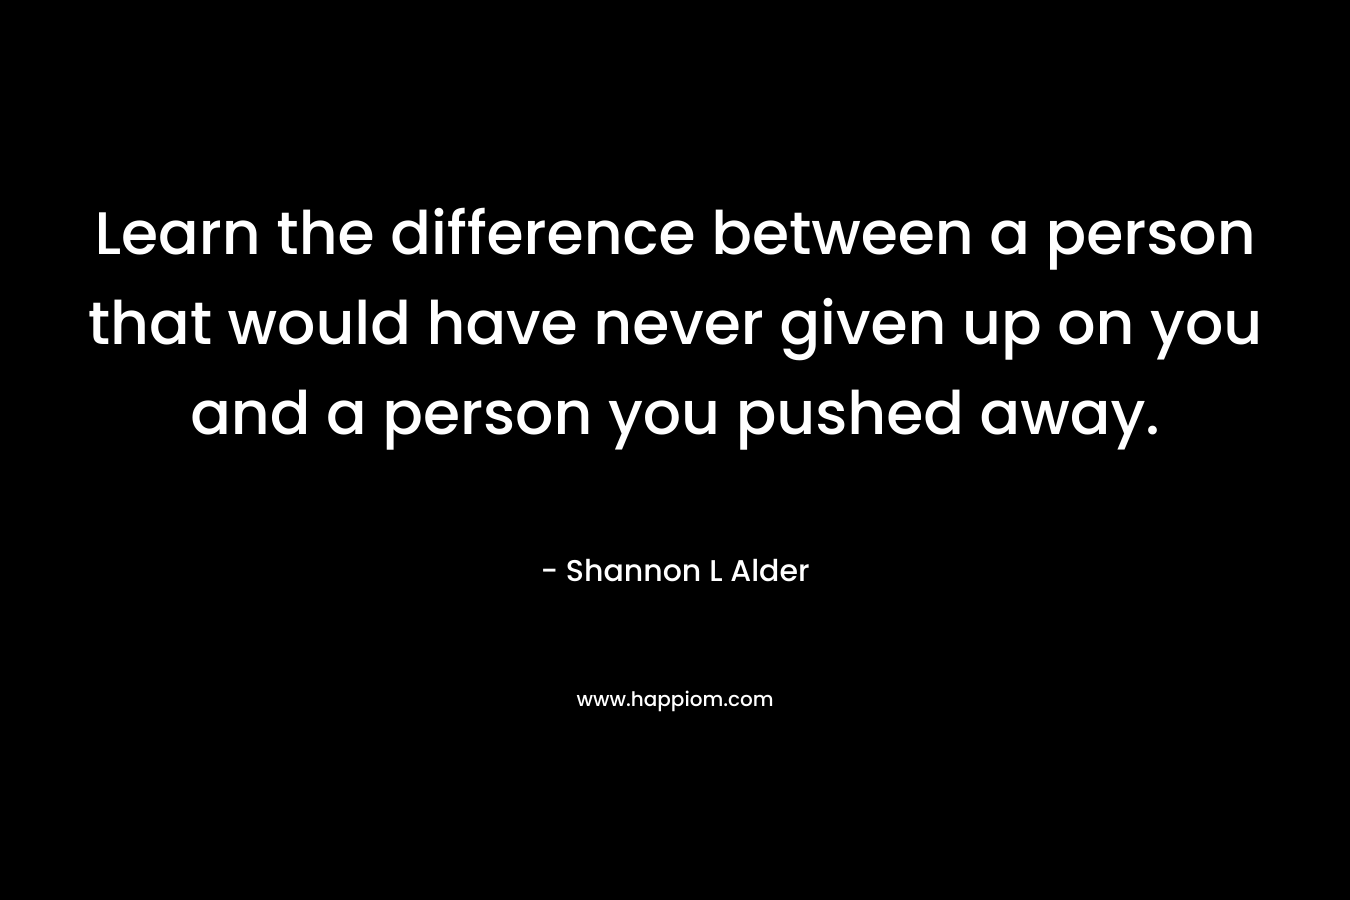 Learn the difference between a person that would have never given up on you and a person you pushed away.